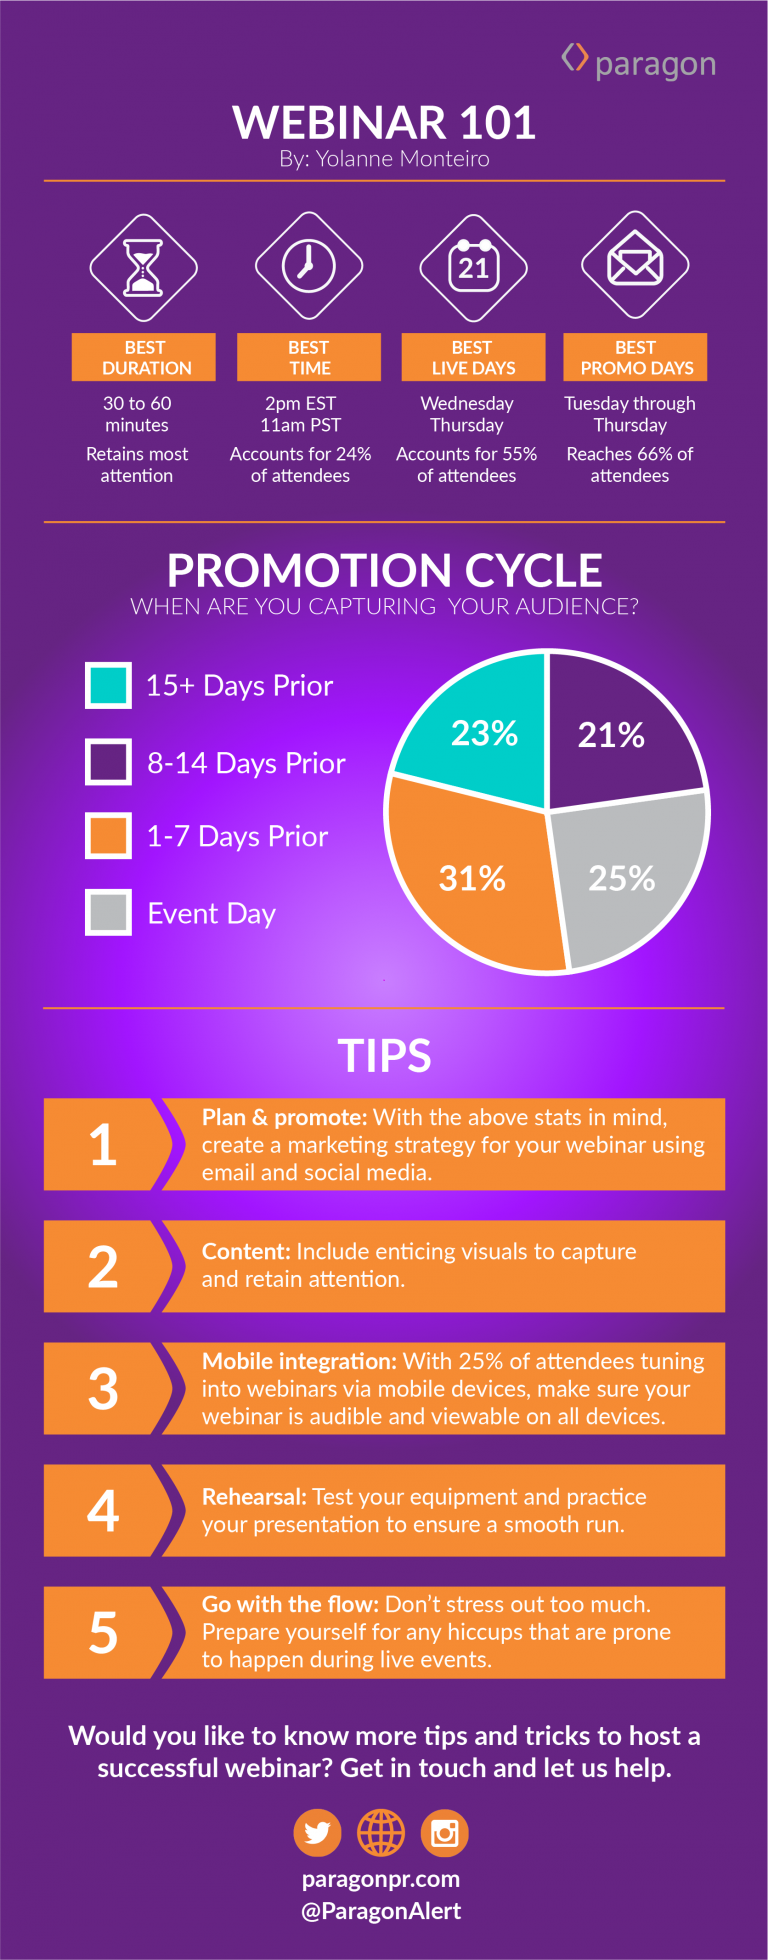 How To Host A Successful Webinar 101 Infographic